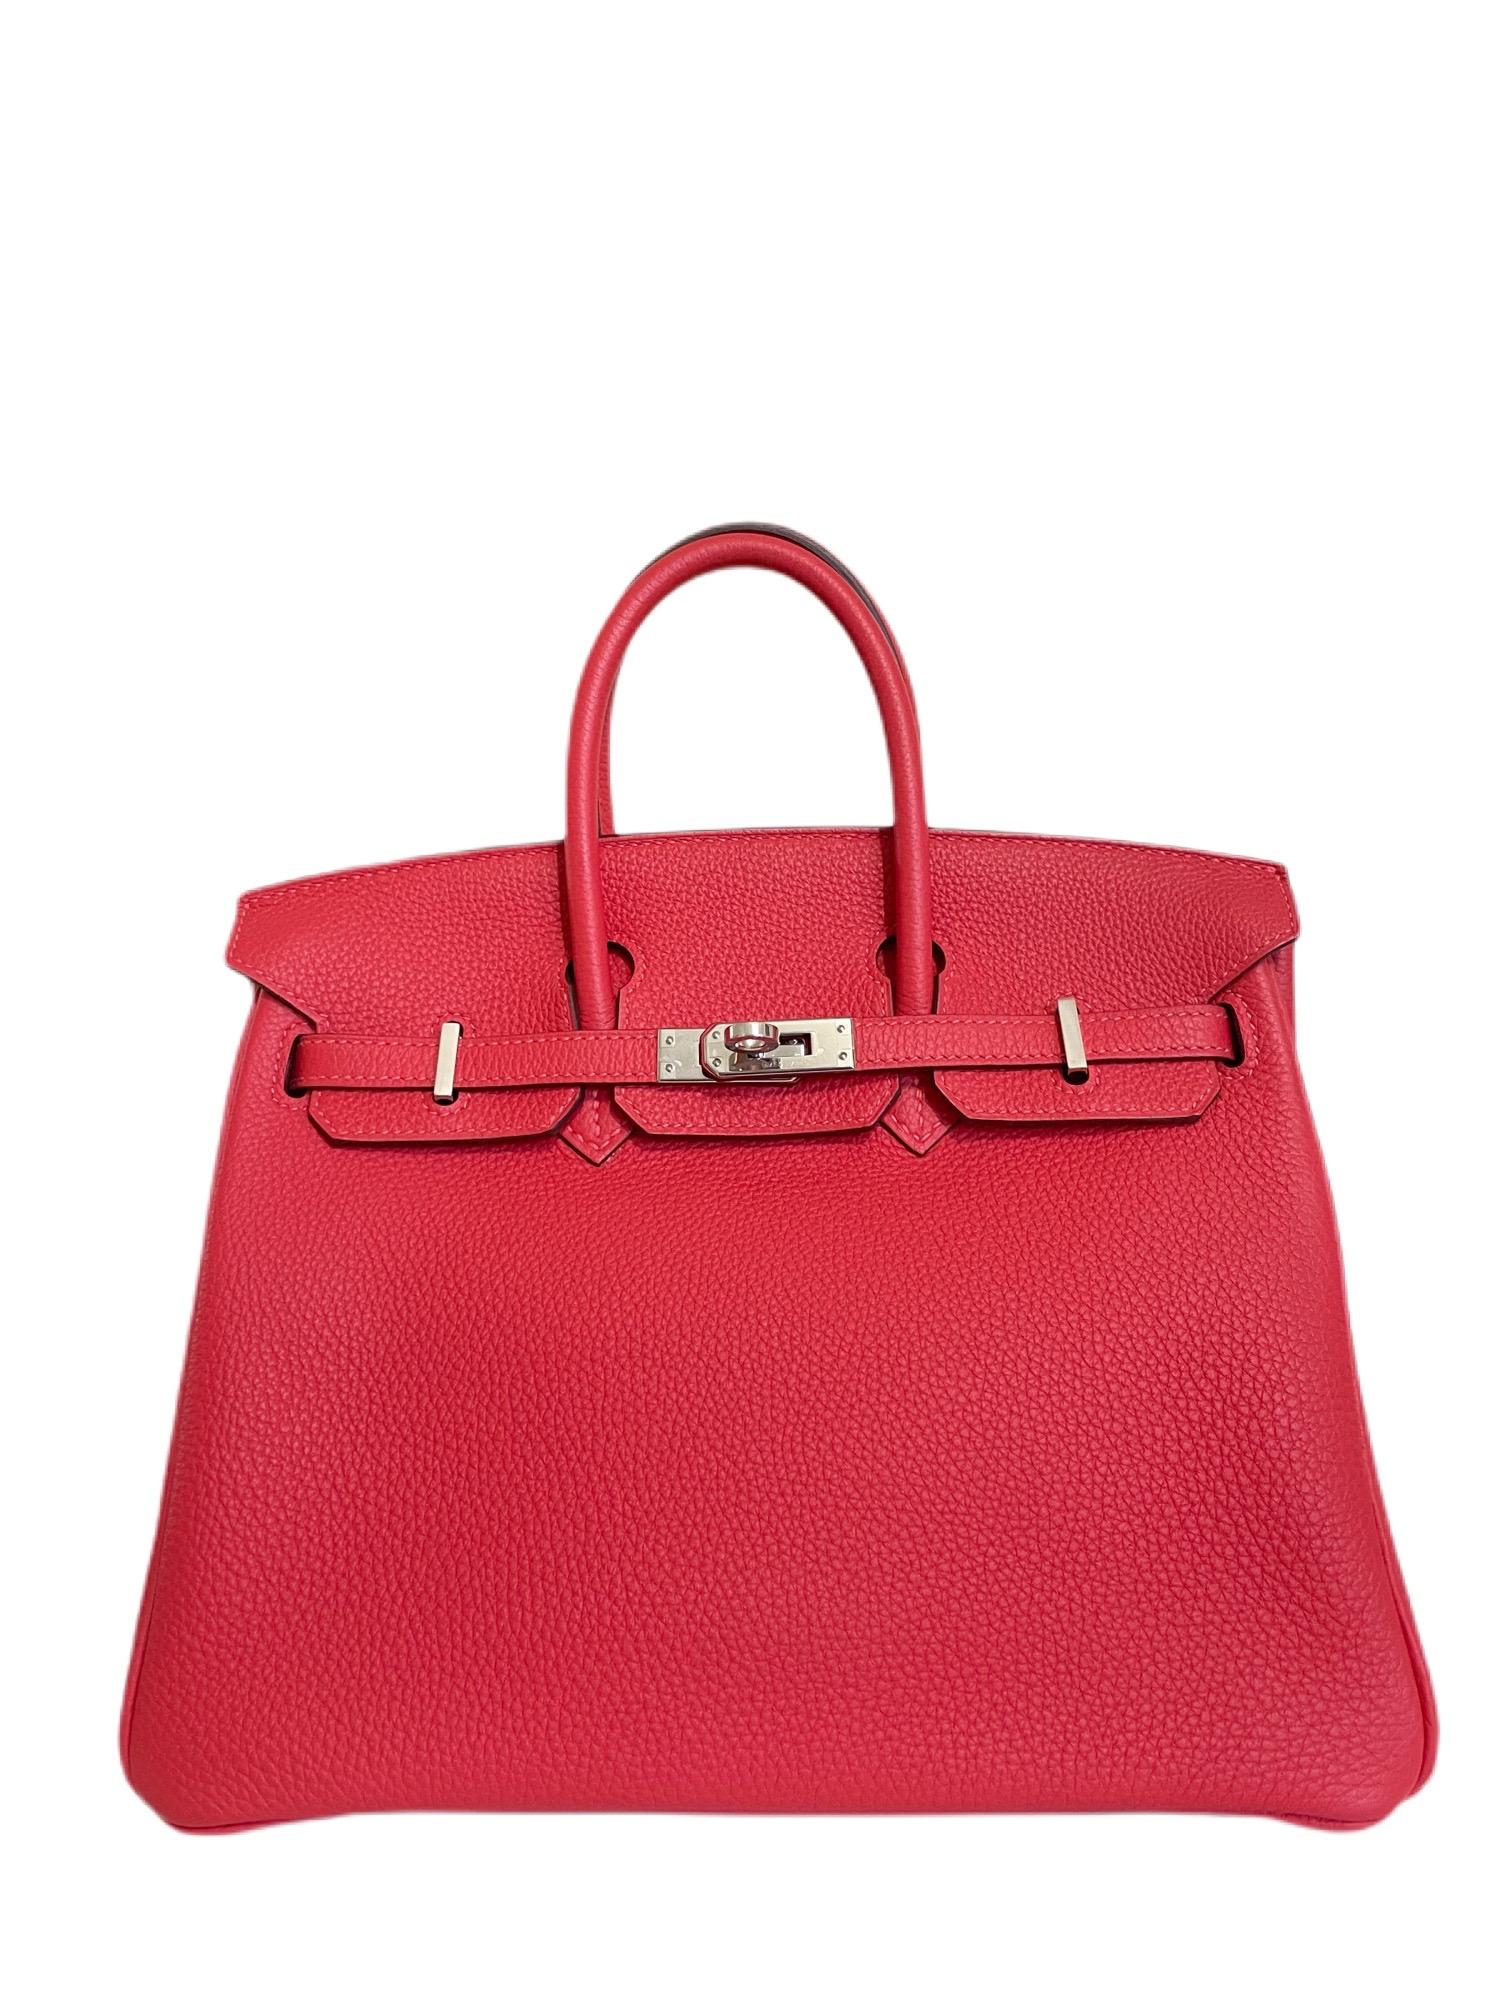 Stunning Hermes Birkin 25 Rouge Pivoine Togo Leather complimented by Palladium Hardware. Pristine condition with plastic on hardware, perfect corners and structure. 
T Stamp 2015. 

Shop with Confidence from Lux Addicts. Authenticity Guaranteed! 